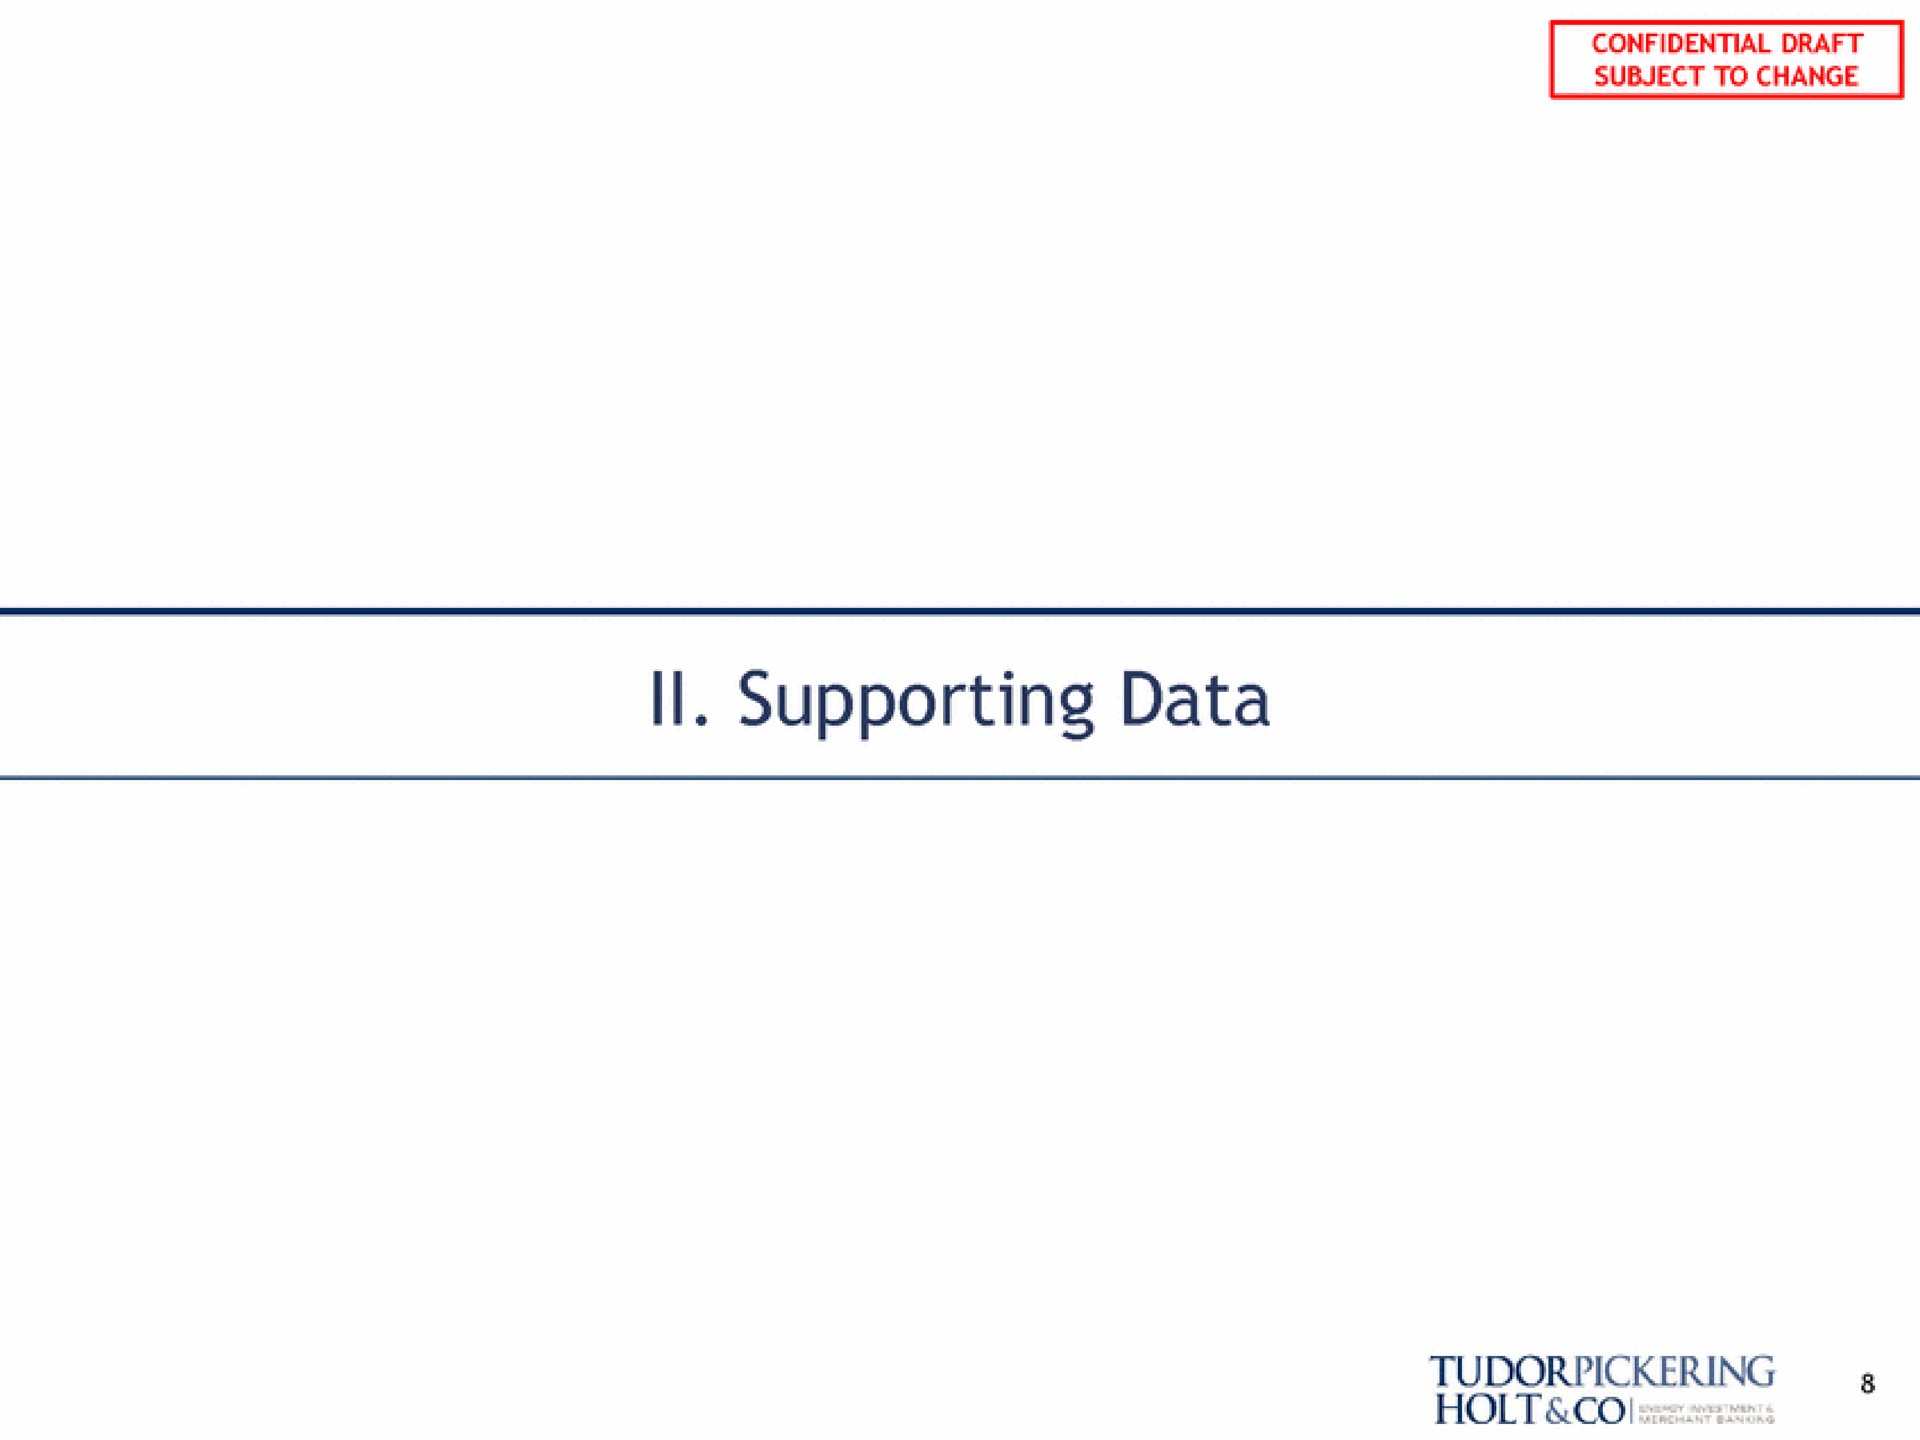 supporting data | Tudor, Pickering, Holt & Co